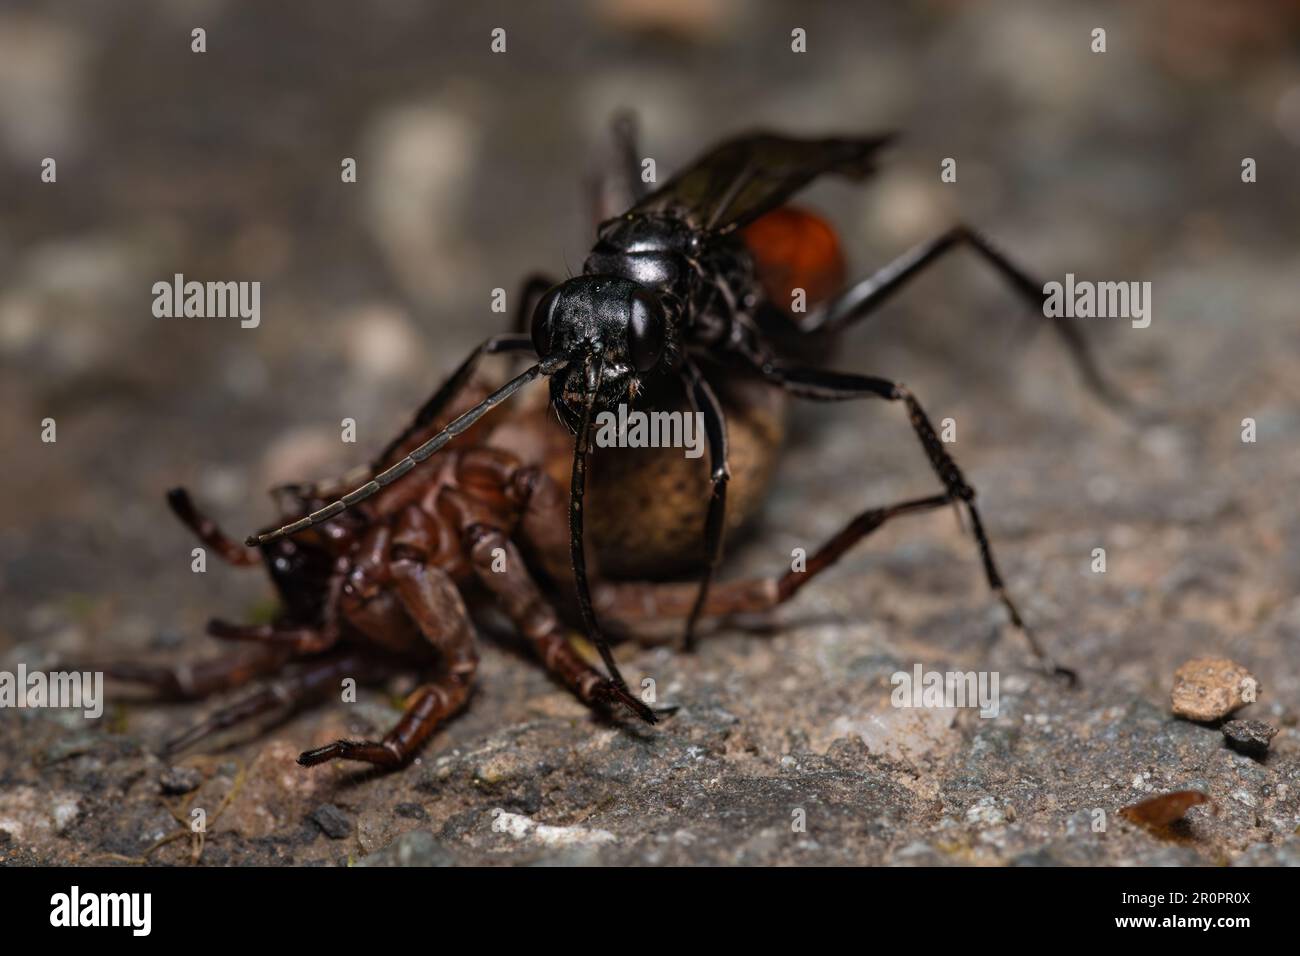 Wolf spider battling a wasp. Stock Photo